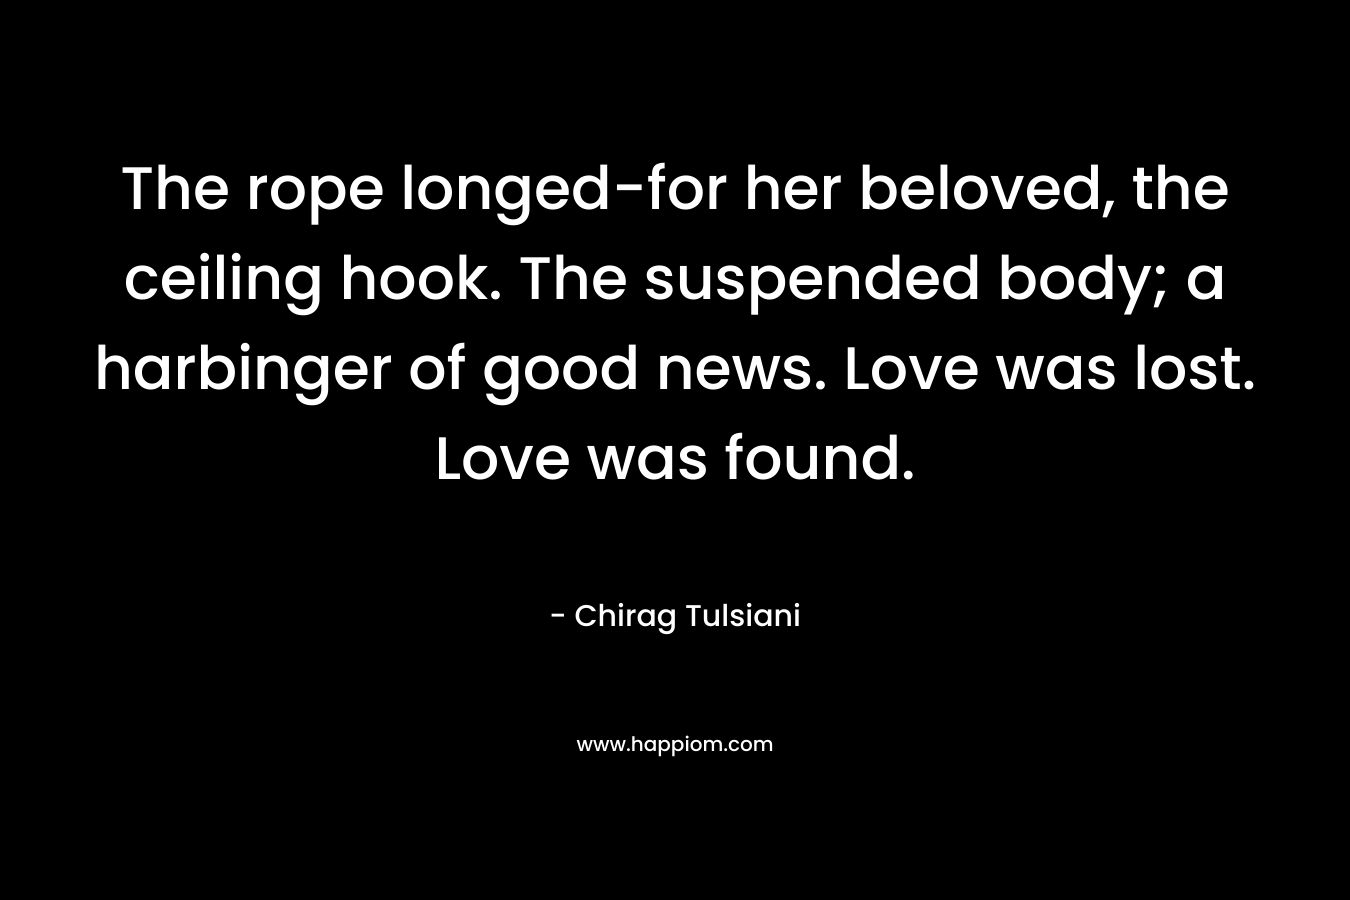 The rope longed-for her beloved, the ceiling hook. The suspended body; a harbinger of good news. Love was lost. Love was found. – Chirag Tulsiani